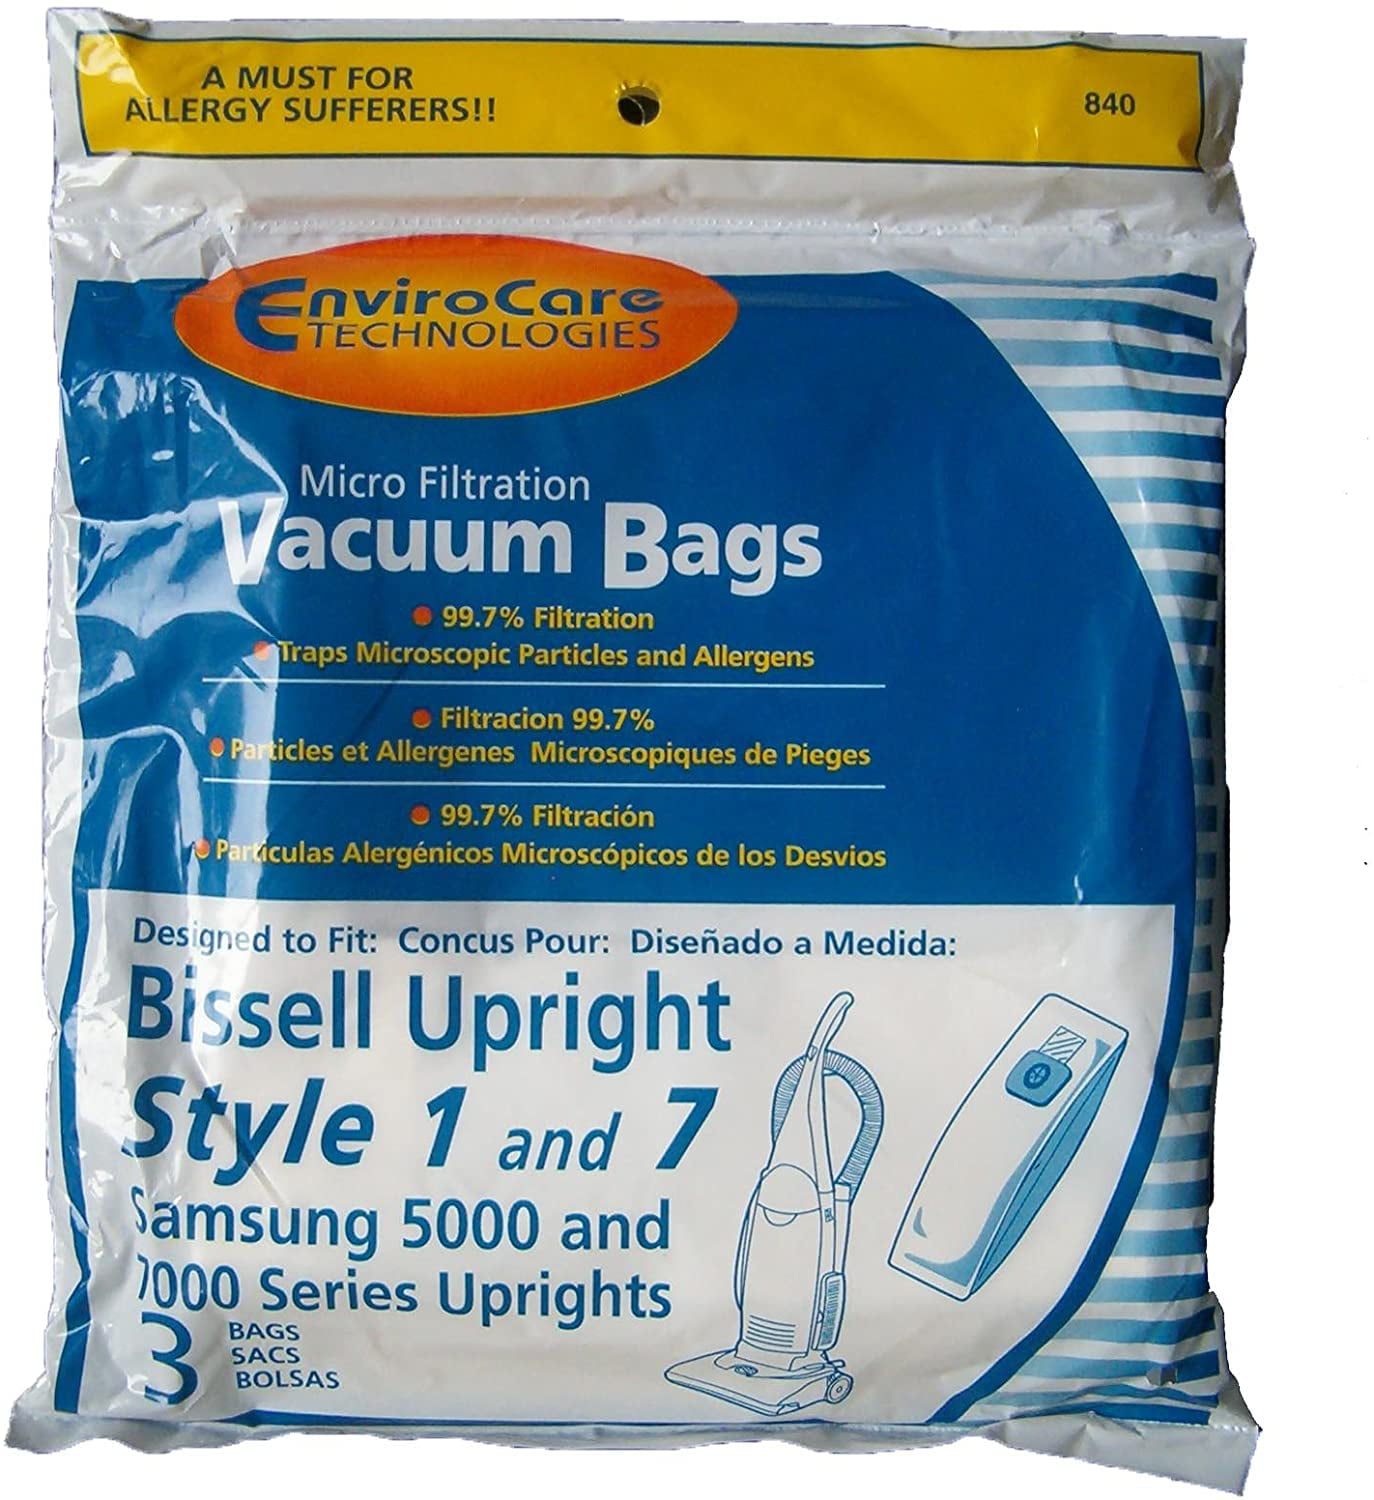 36 KIRBY GENERATION MICROFILTRATION VACUUM CLEANER BAGS 